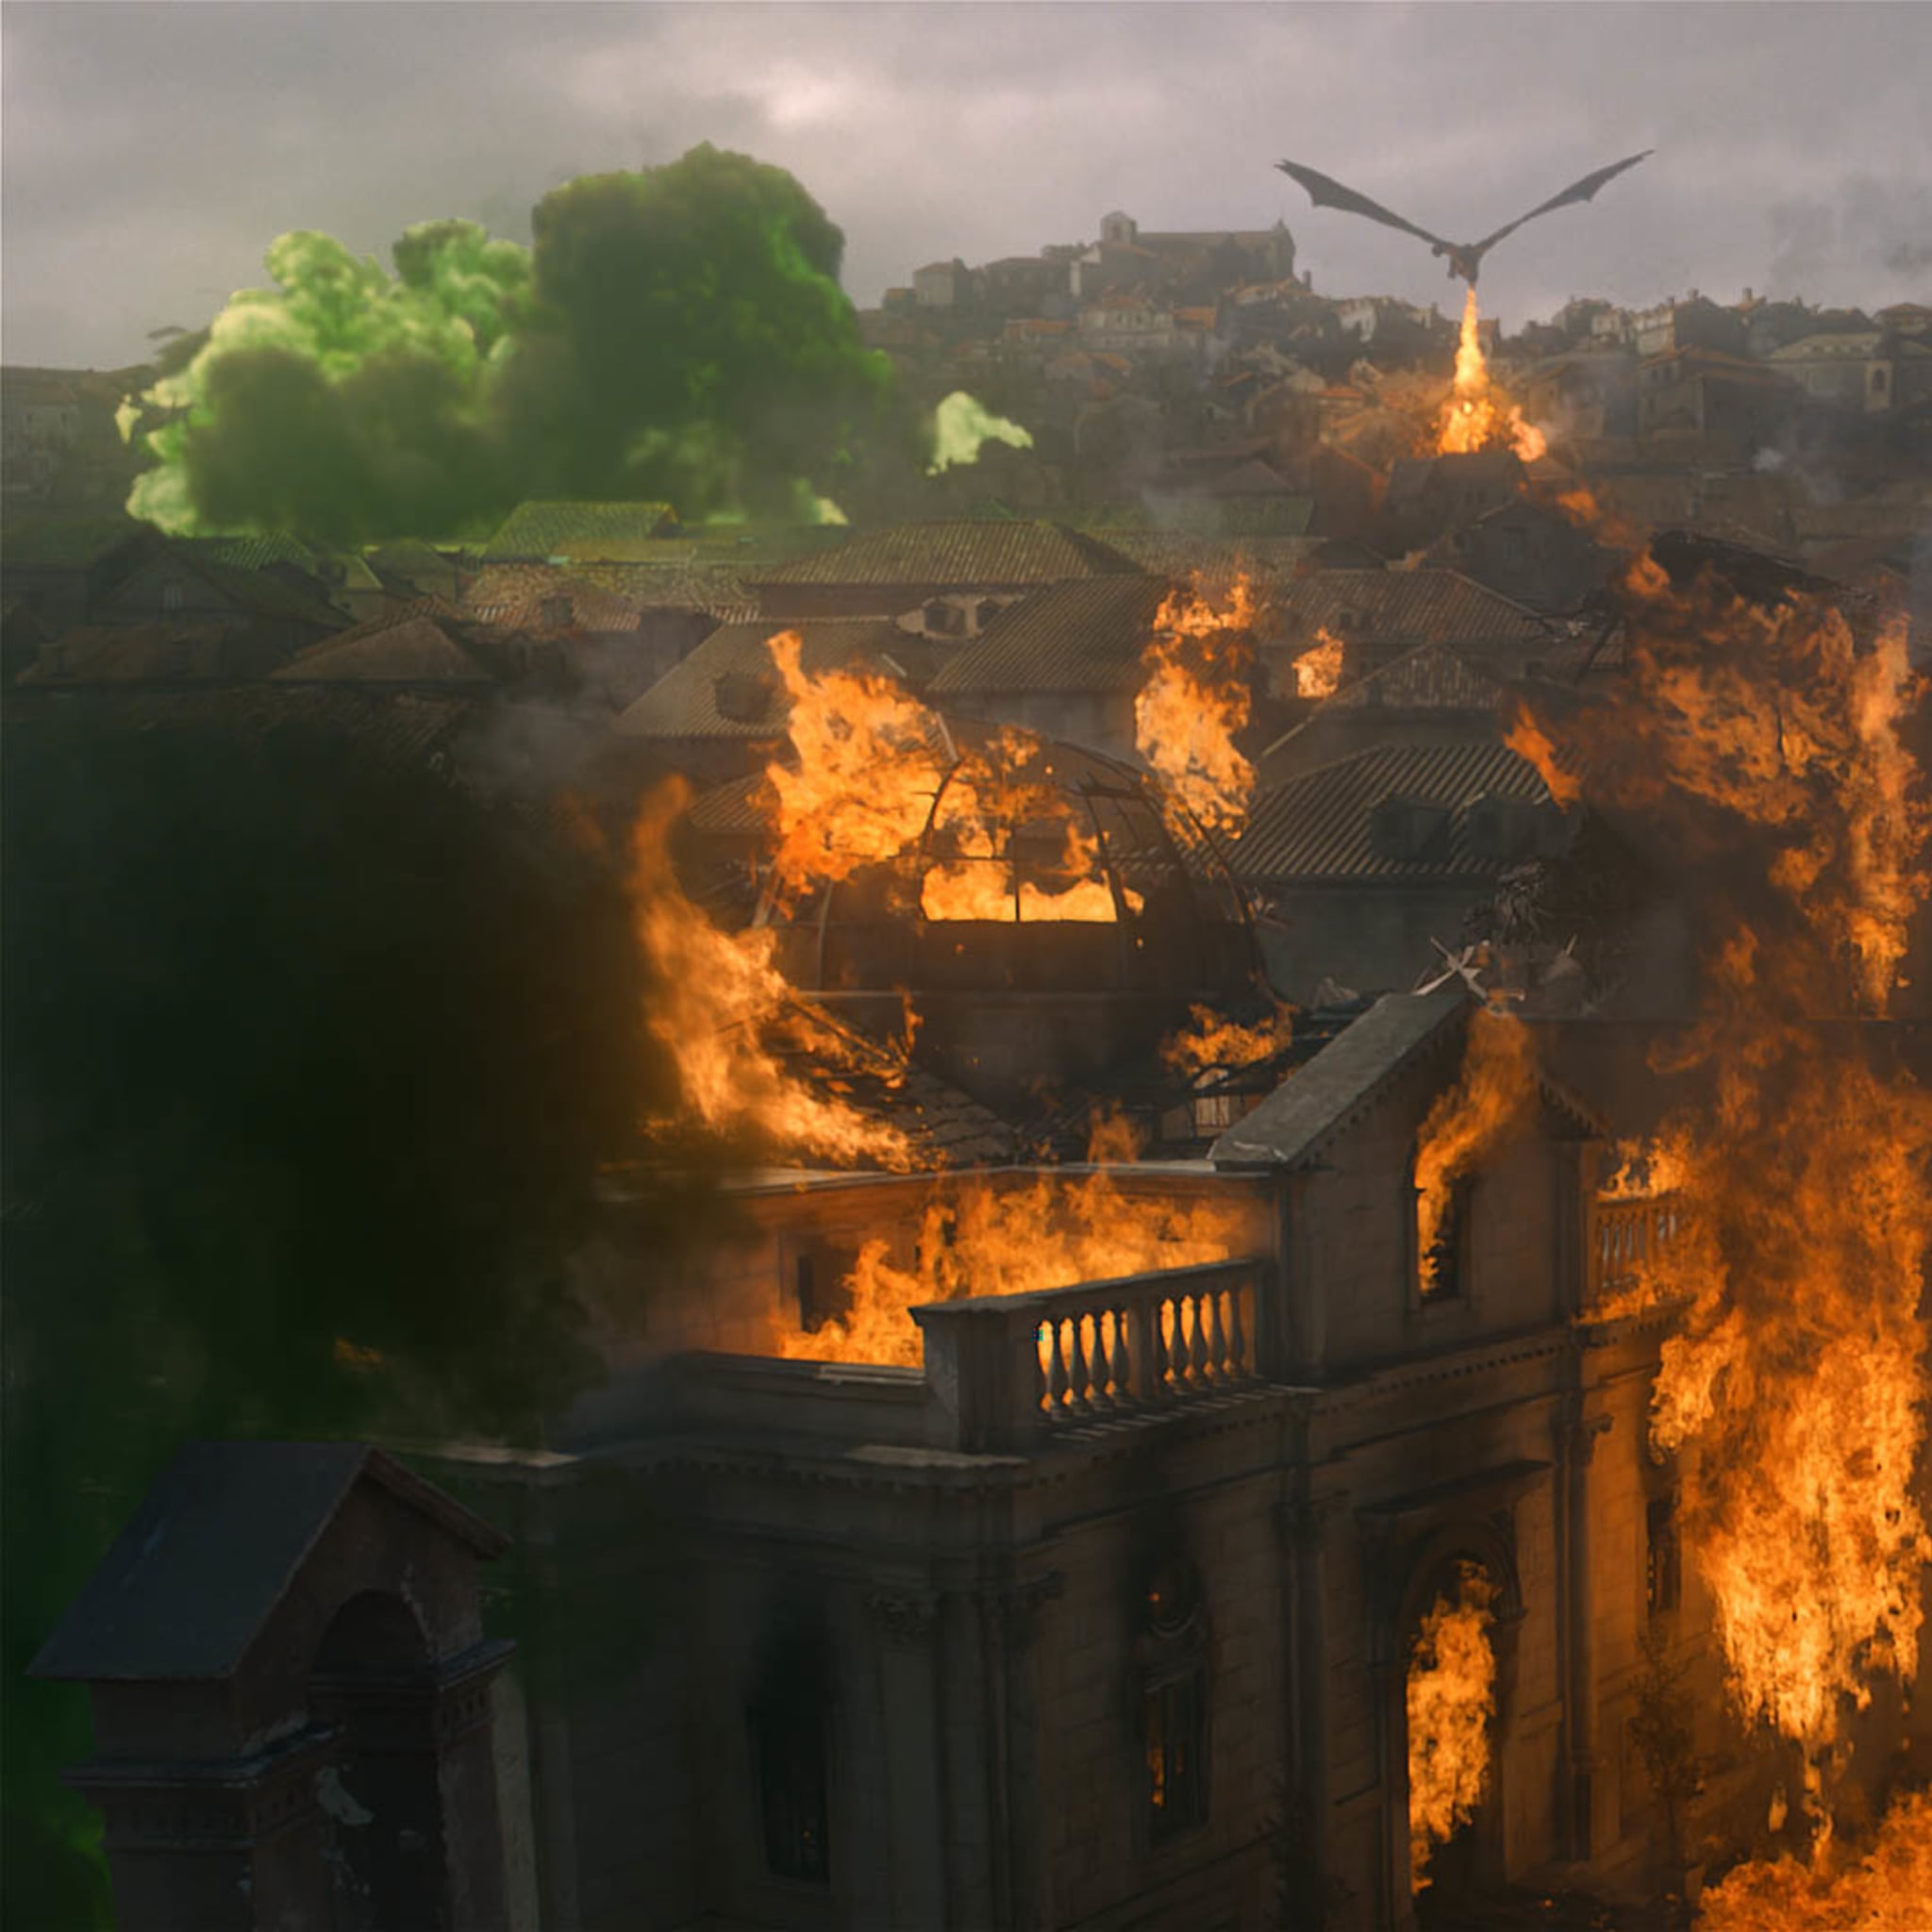 Where Did The Green Wildfire Come From On Game Of Thrones